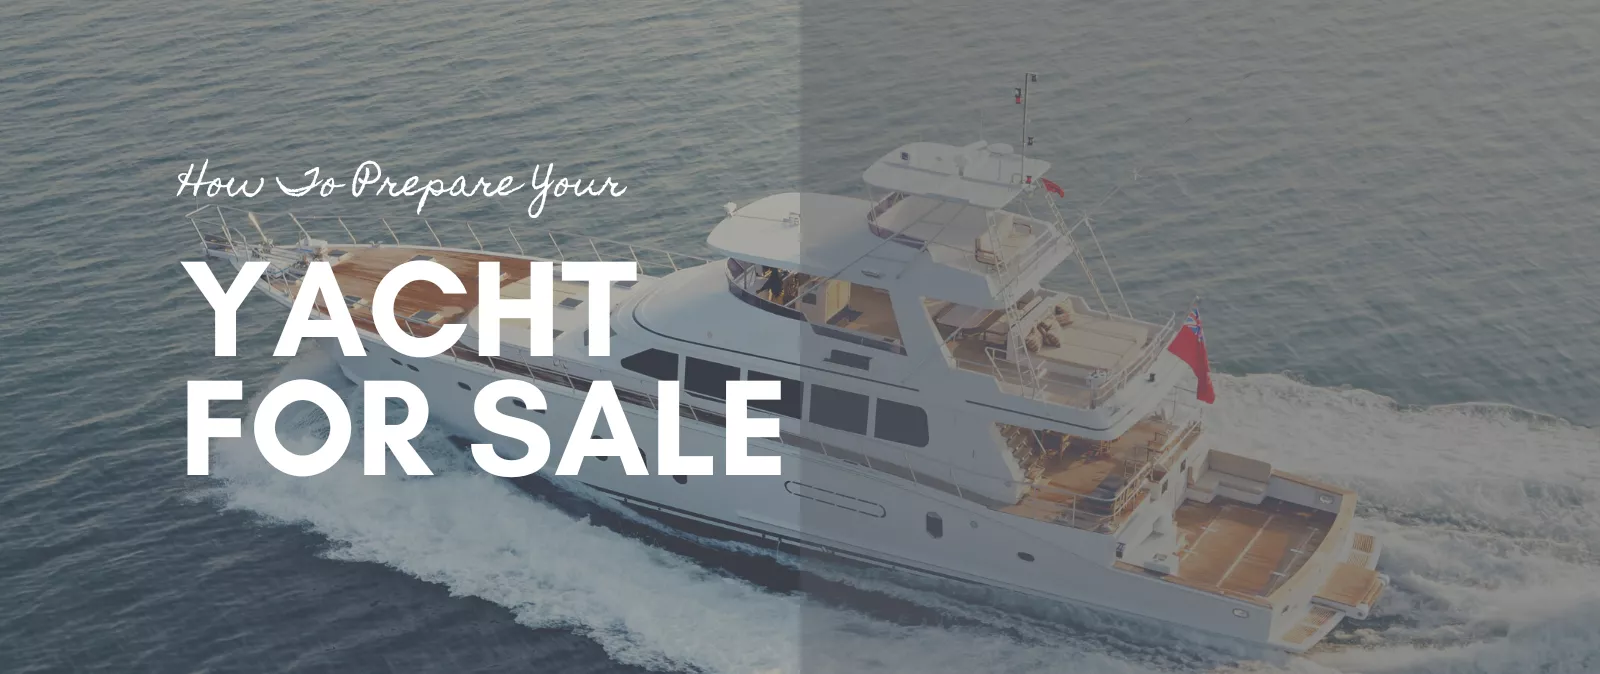 HOW TO PREPARE YOUR YACHT FOR SALE